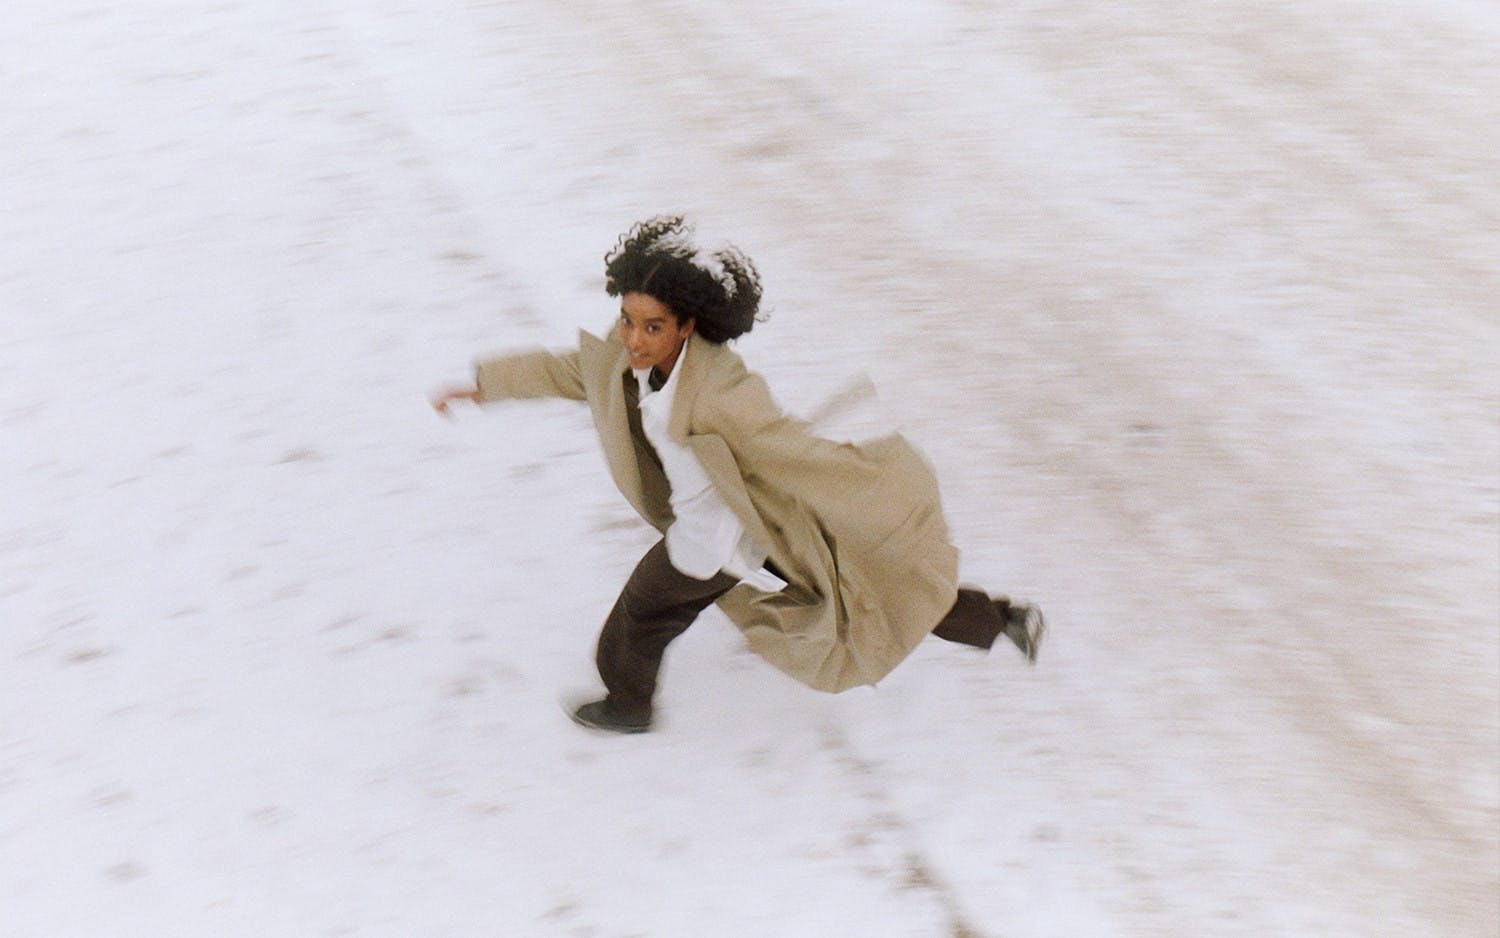 Woman with accident insurance walks across a snow-covered field.